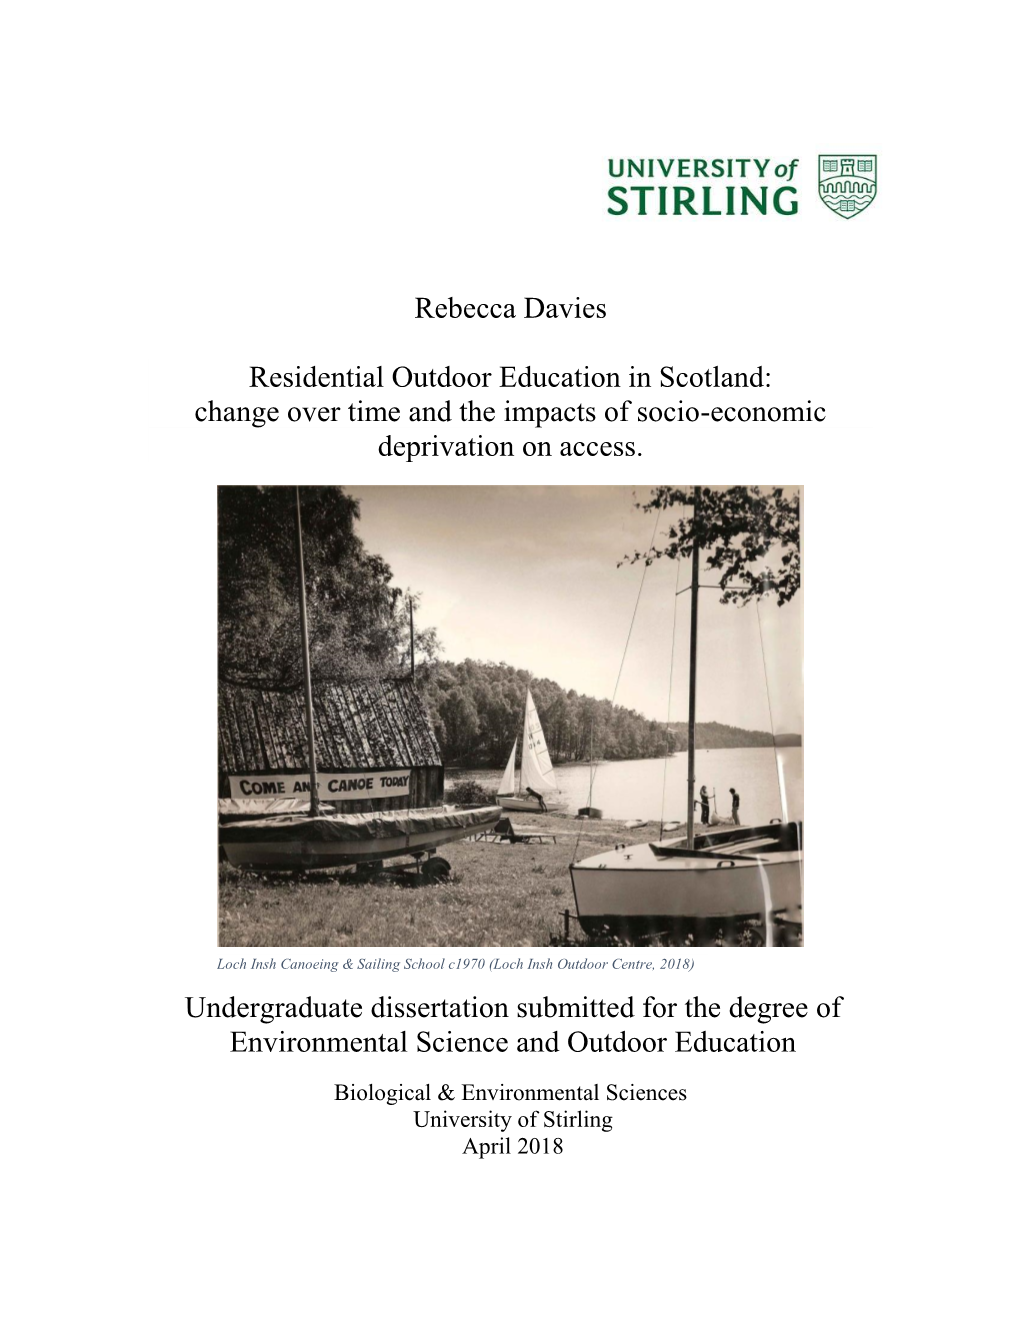 Dissertation. Residential Outdoor Education in Scotland